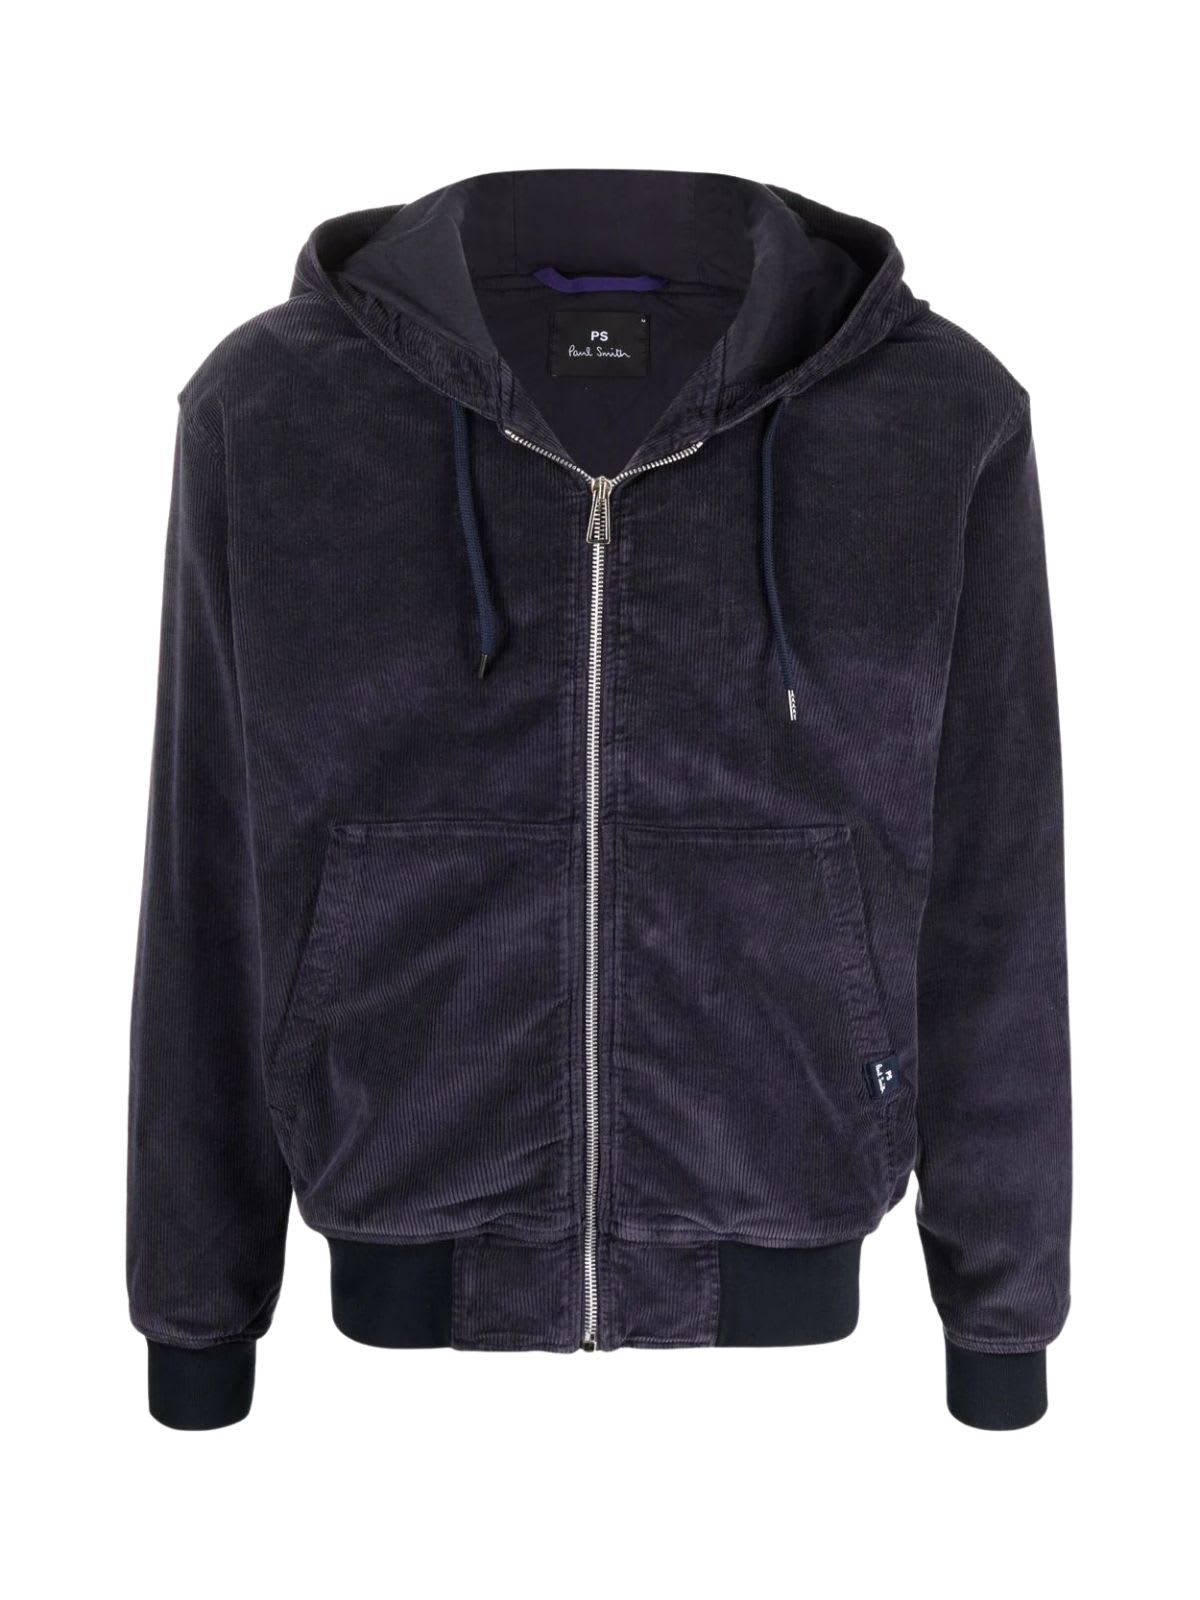 PS by Paul Smith Mens Hooded Jacket